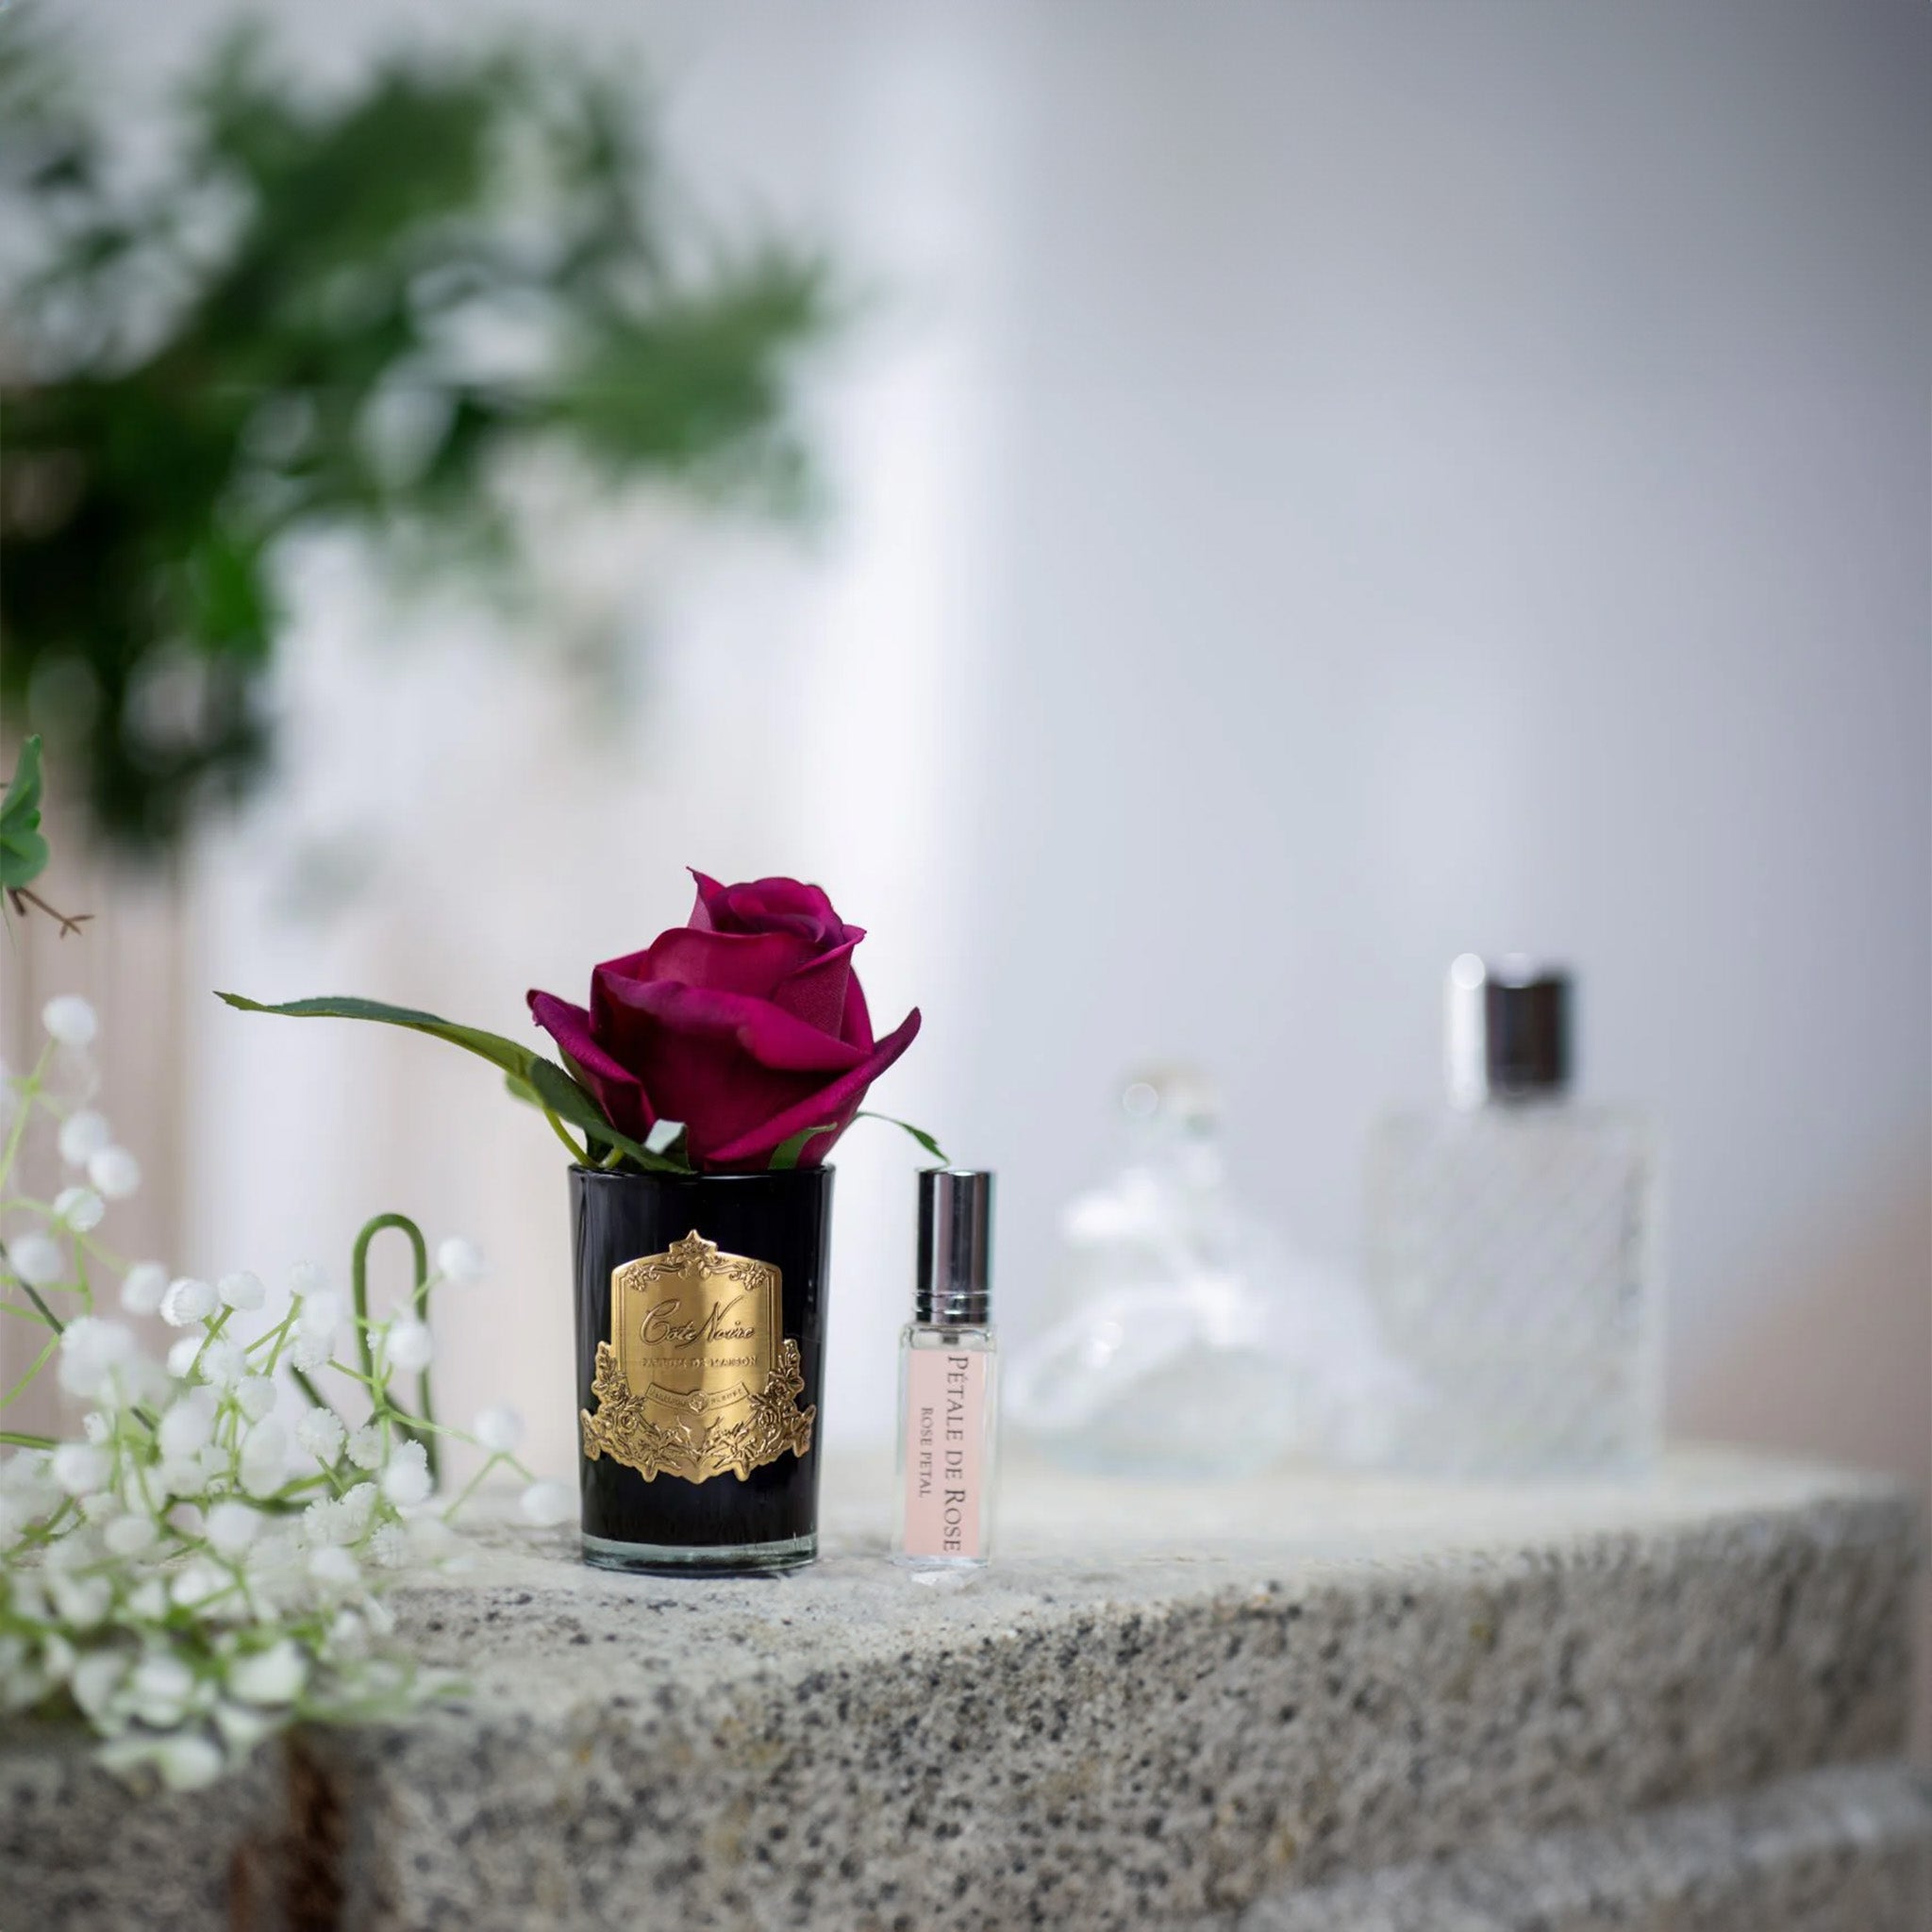 A carmine red rosebud in a black vase with a gold label on a stone surface with white flowers and a small perfume vial in the background